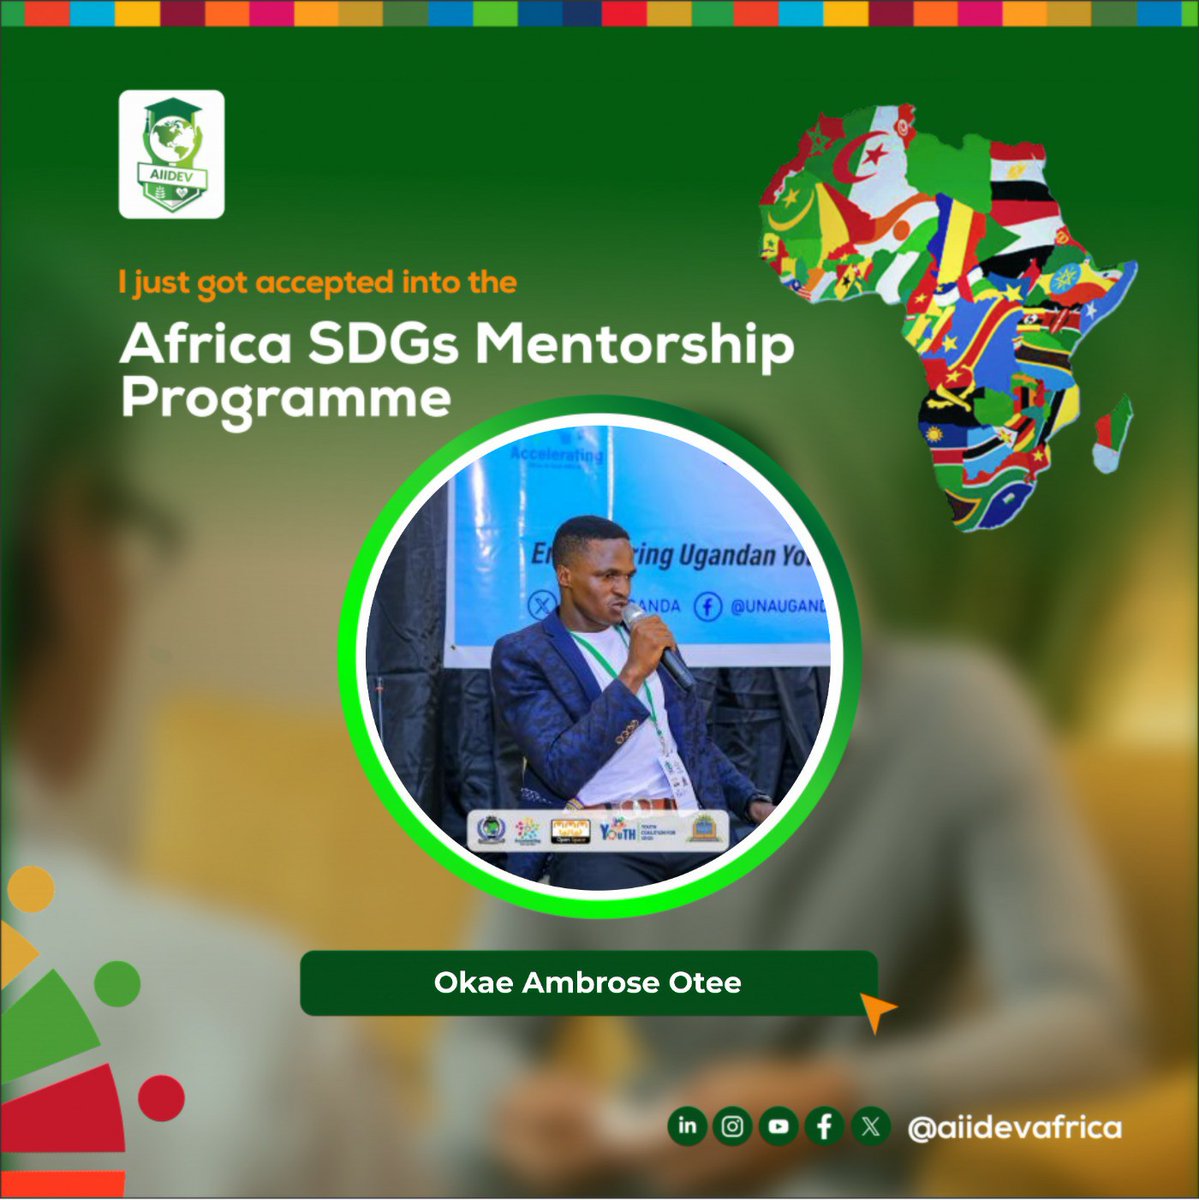 I am so thrilled to be selected for the Africa SDGs Mentorship Programme! Grateful for this incredible opportunity to contribute towards sustainable development in Africa. Let's work together to make a positive impact! #AIIDEVAfrica #SDGs